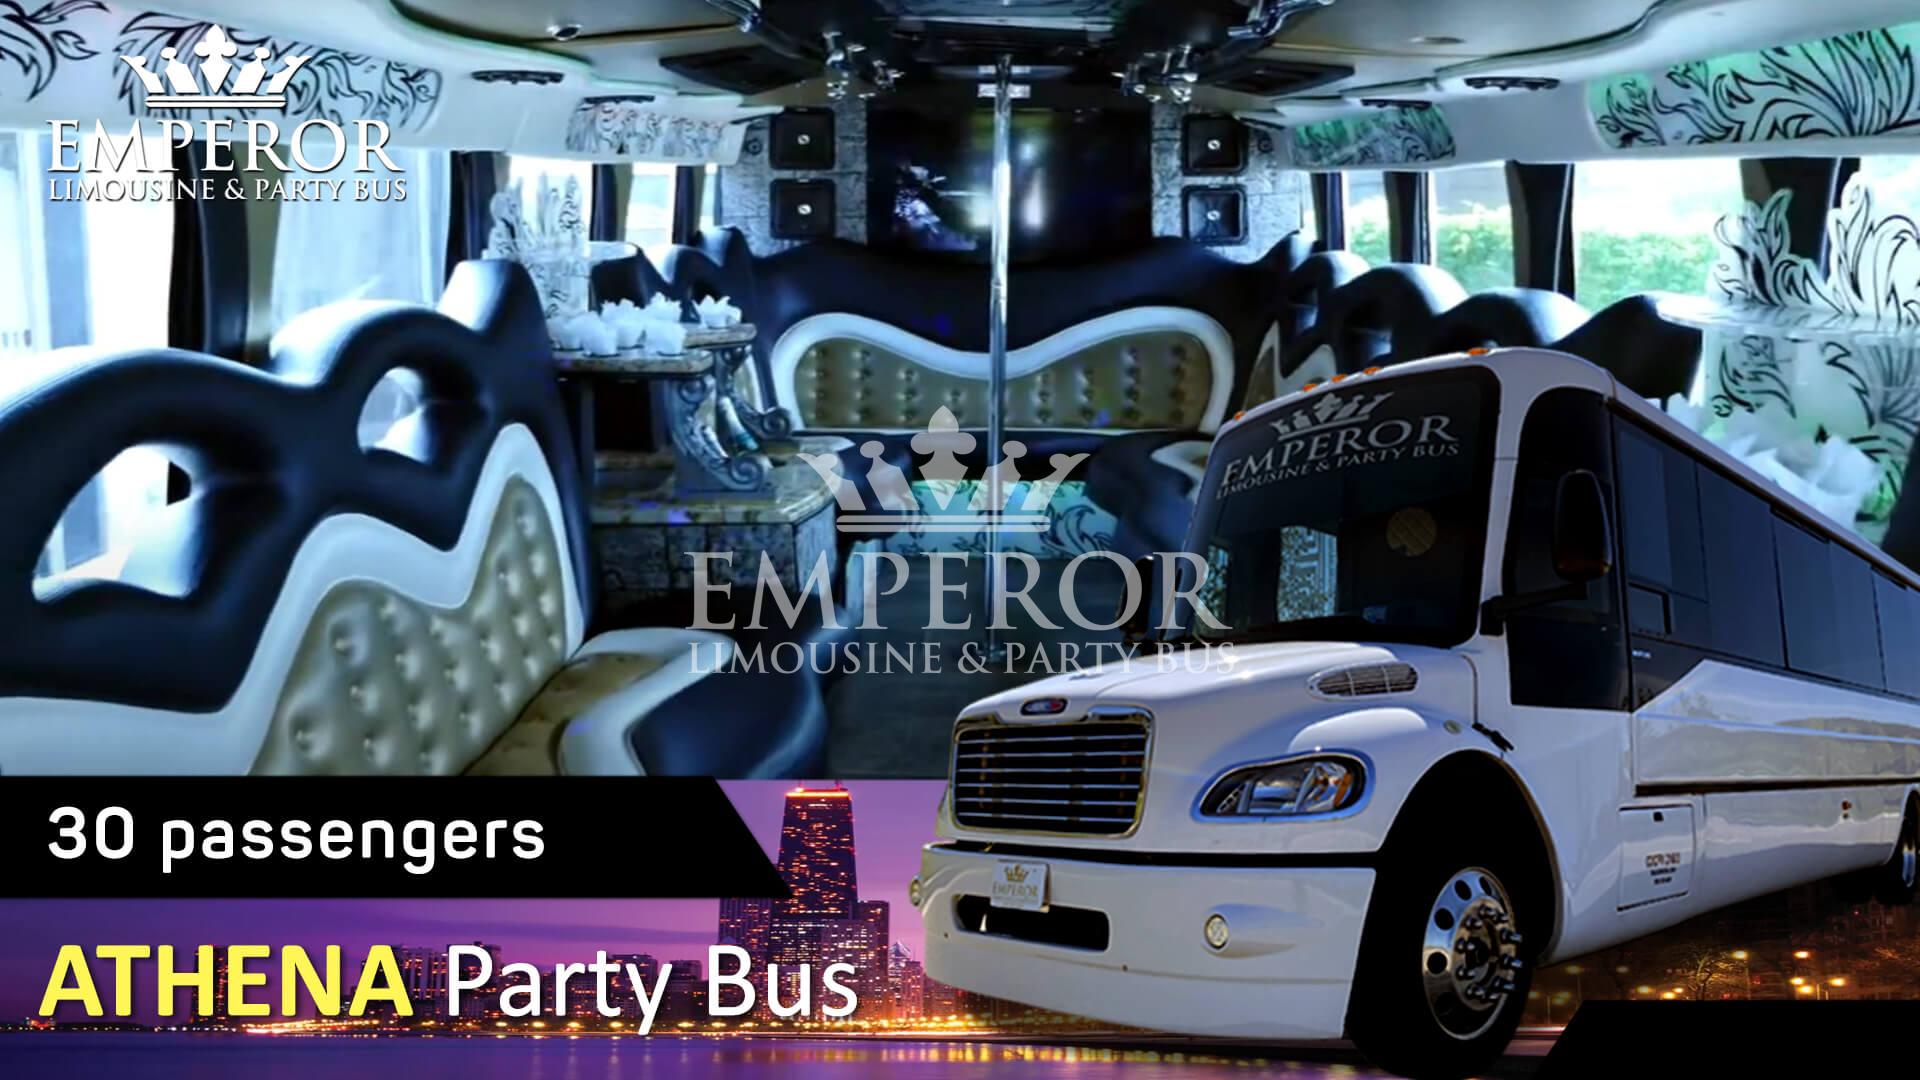 Party bus rental service in Broadview - Athena Edition